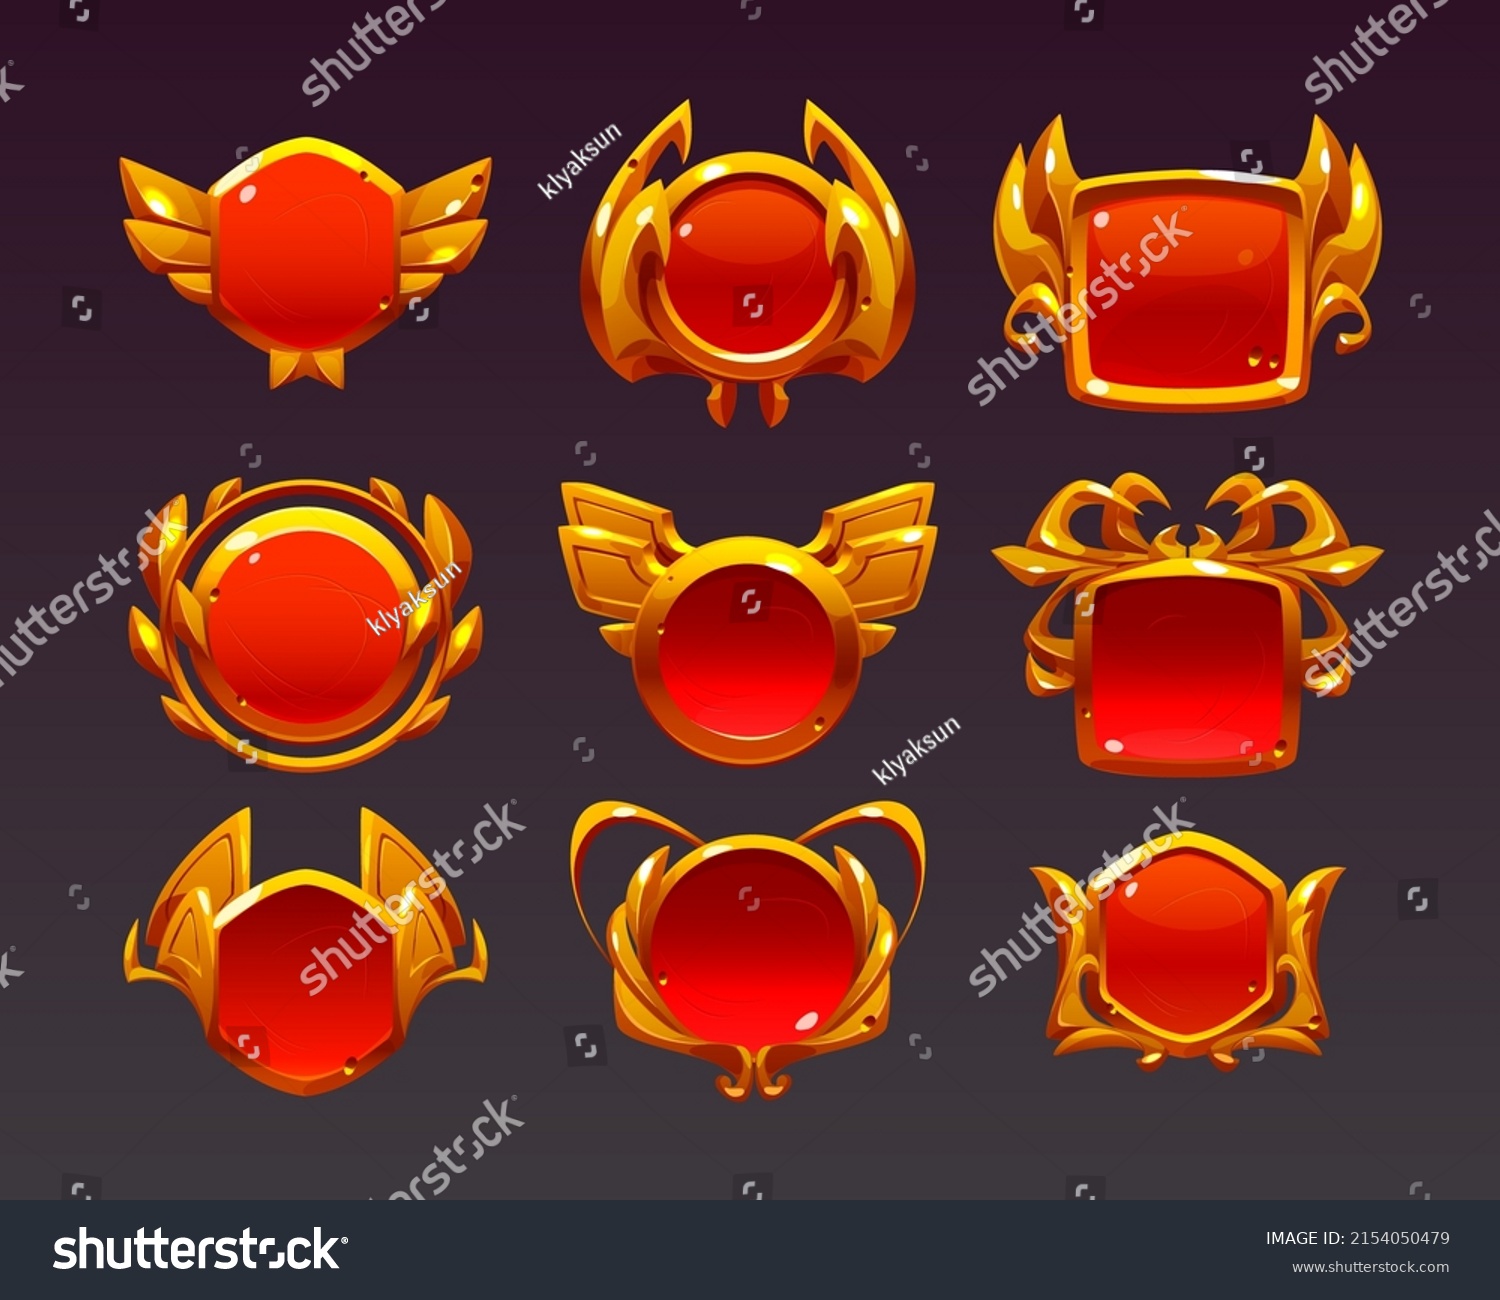 SVG of Game level golden ui icons, buttons, isolated award or bonus frames, empty badges or banners with red glossy plank, gold wings, laurel wreath or spider legs decor. Vector graphic elements for rpg svg